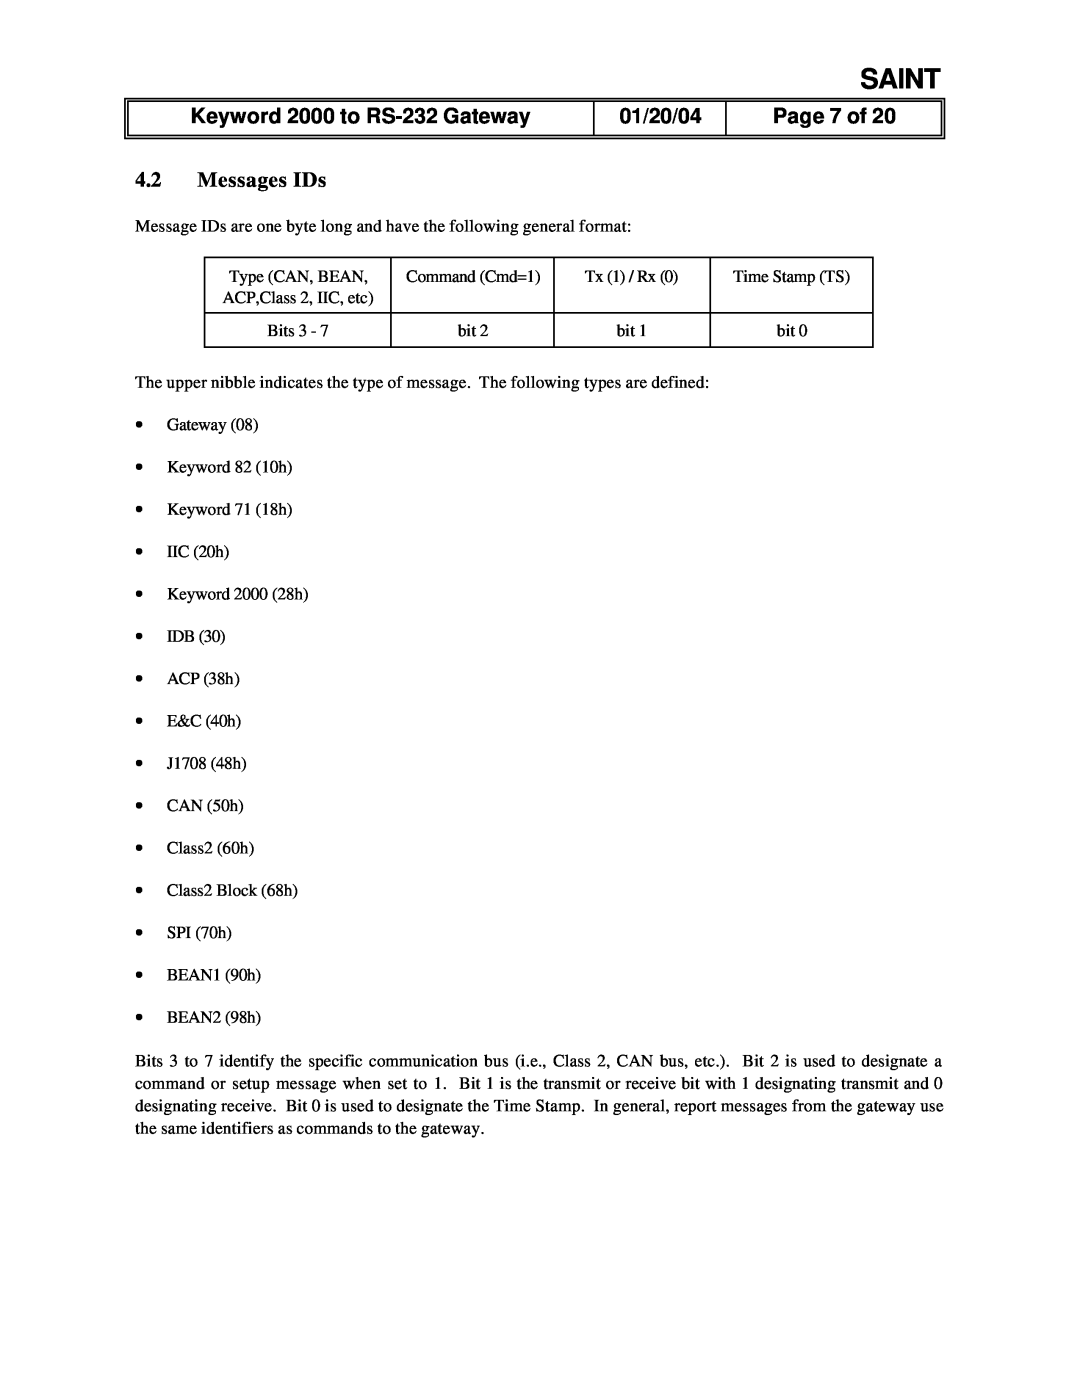 Delphi manual Page 7 of, 4.2Messages IDs, Saint, Keyword 2000 to RS-232Gateway, 01/20/04 